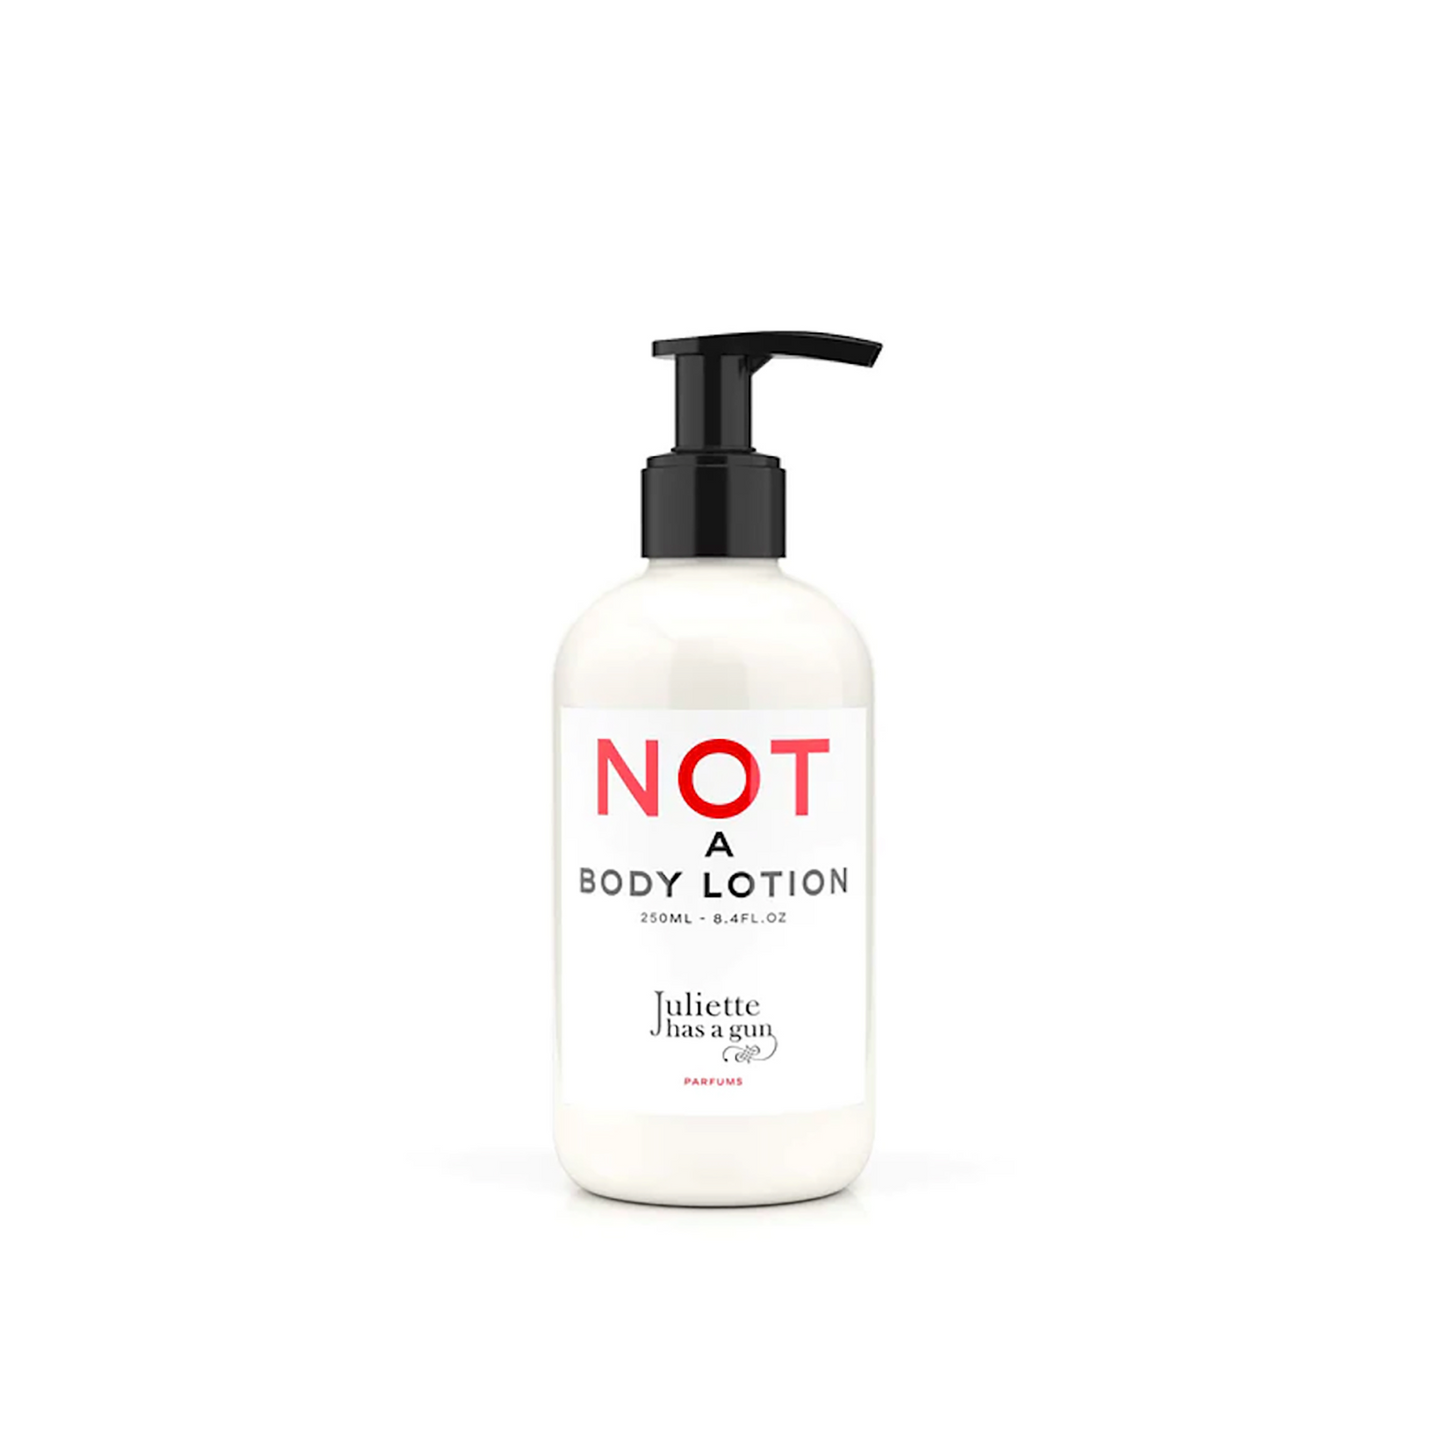 Not a Perfume Body Lotion